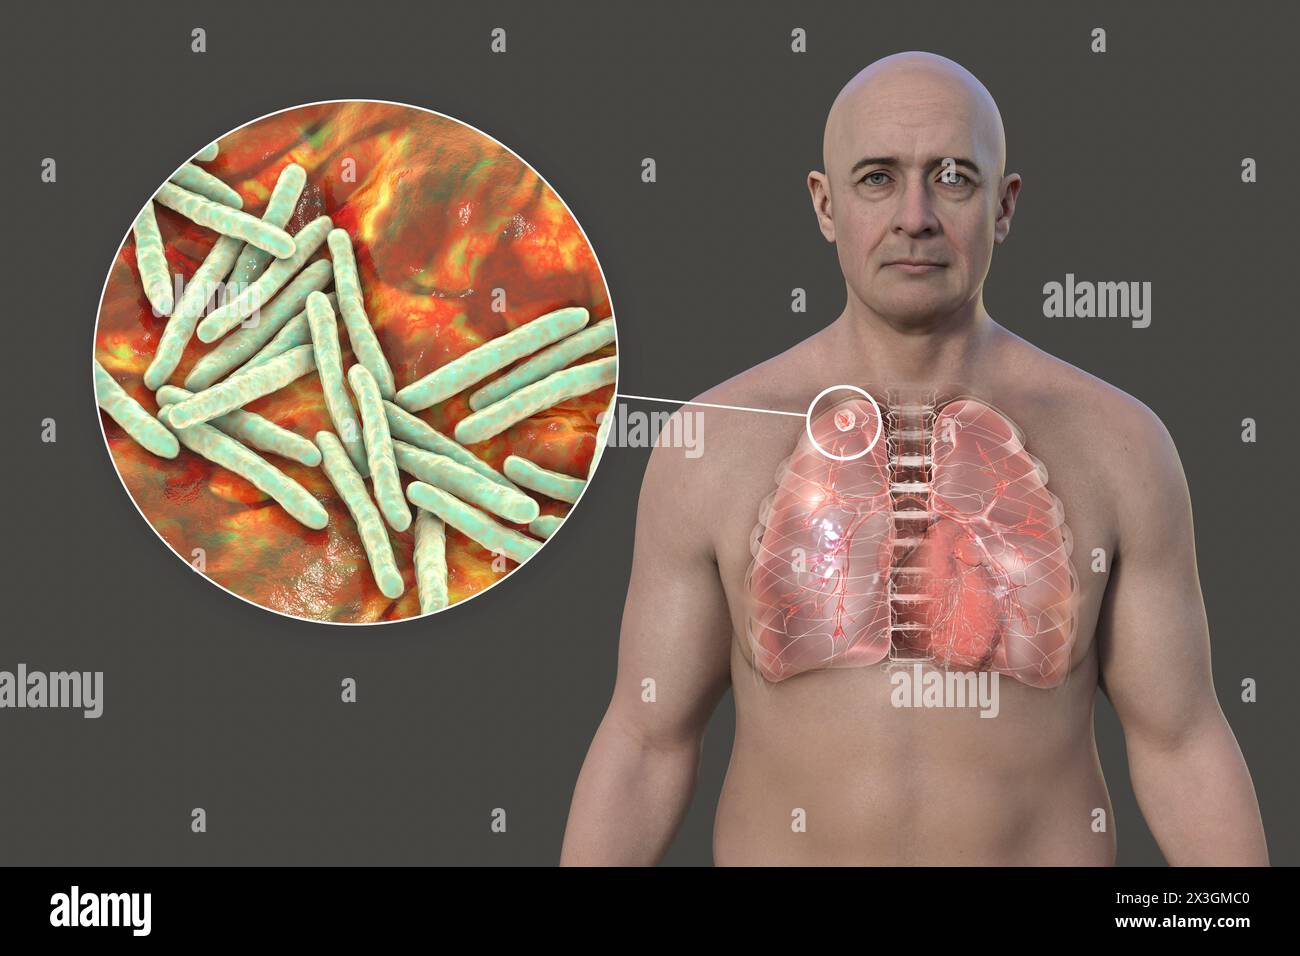 Illustration of a man with lungs affected by secondary tuberculosis and close-up view of Mycobacterium tuberculosis bacteria. Stock Photo